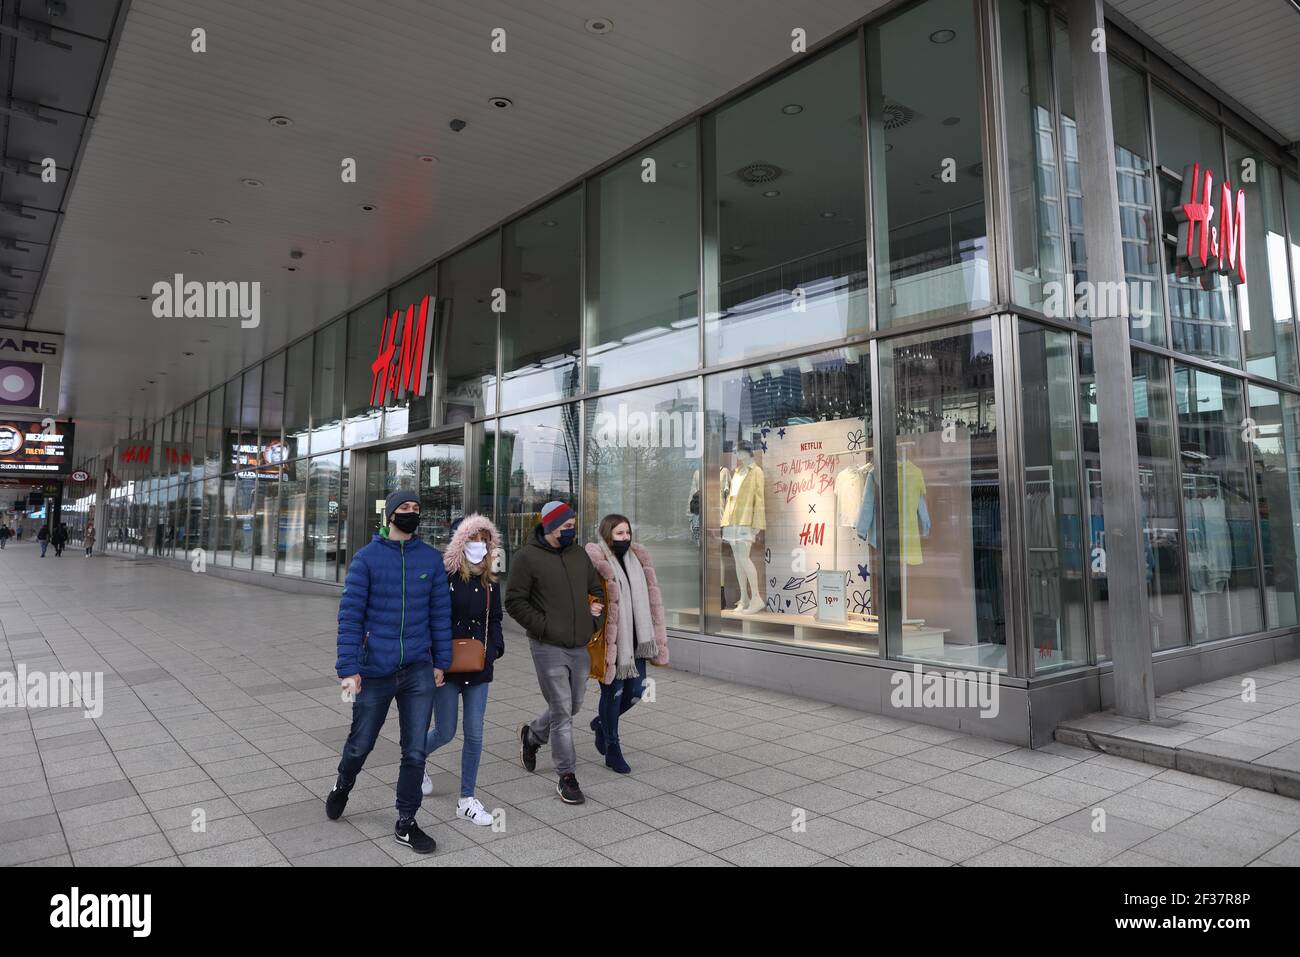 Warsaw, Poland. 15th Mar, 2021. People walk past a closed store in central Warsaw, Poland, on March 15, 2021. The Polish government reintroduced lockdown measures in Warsaw on Monday. According to Polish Health Minister Adam Niedzielski, the lockdown is in force from March 15 to March 28. Hotels, cultural institutions and sports facilities are shut down and the operation of shopping centers is also be restricted. Credit: Jaap Arriens/Xinhua/Alamy Live News Stock Photo